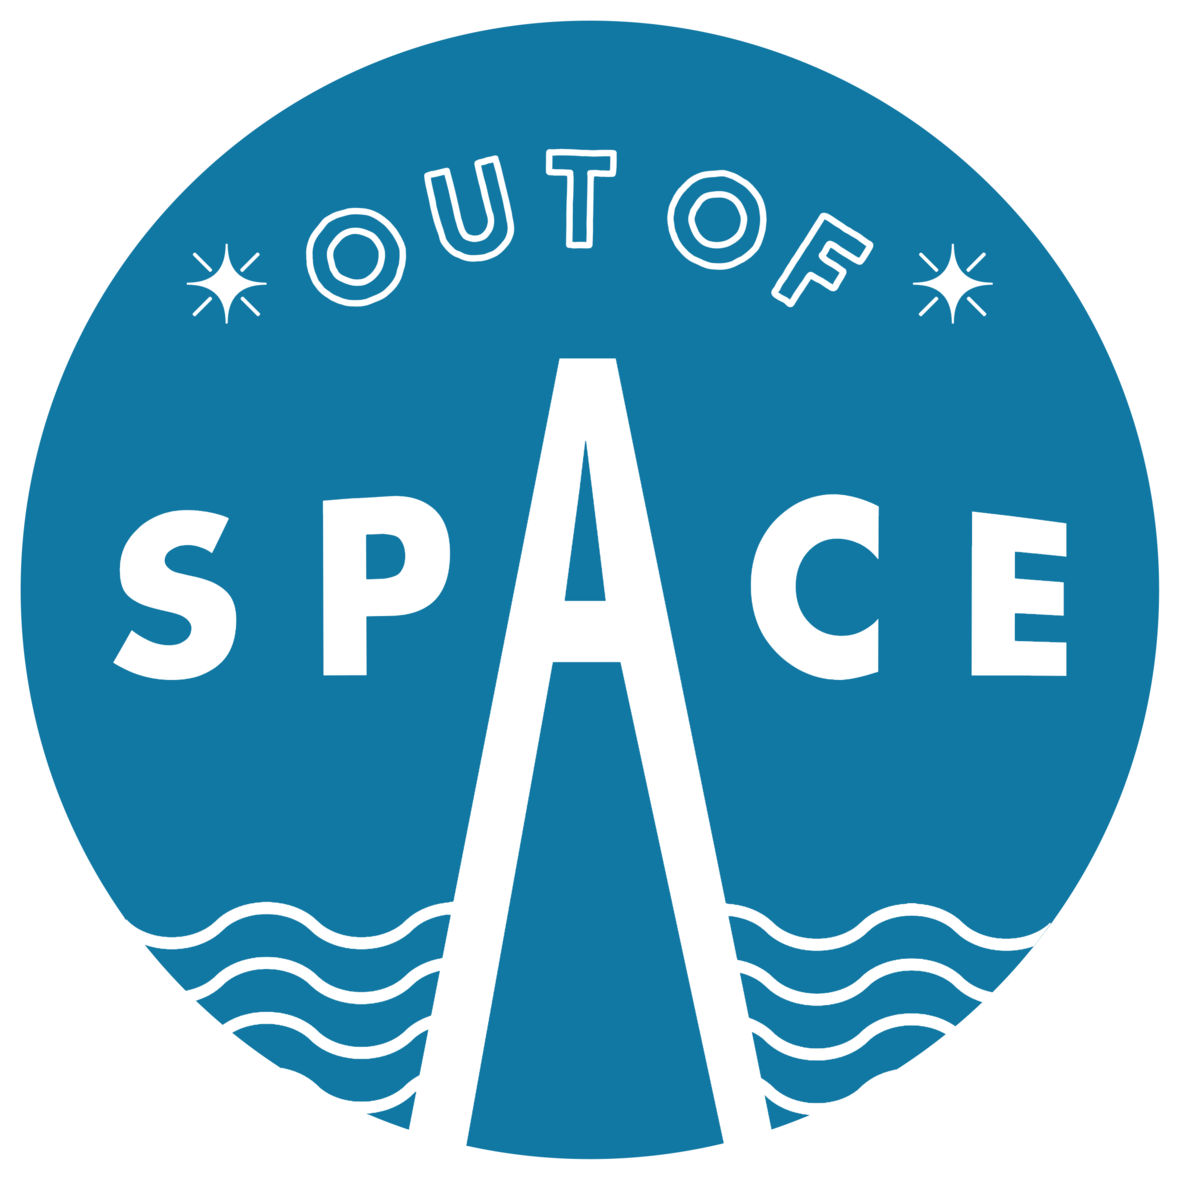 Evanston “Out Of Space” Concerts Announced For 2020